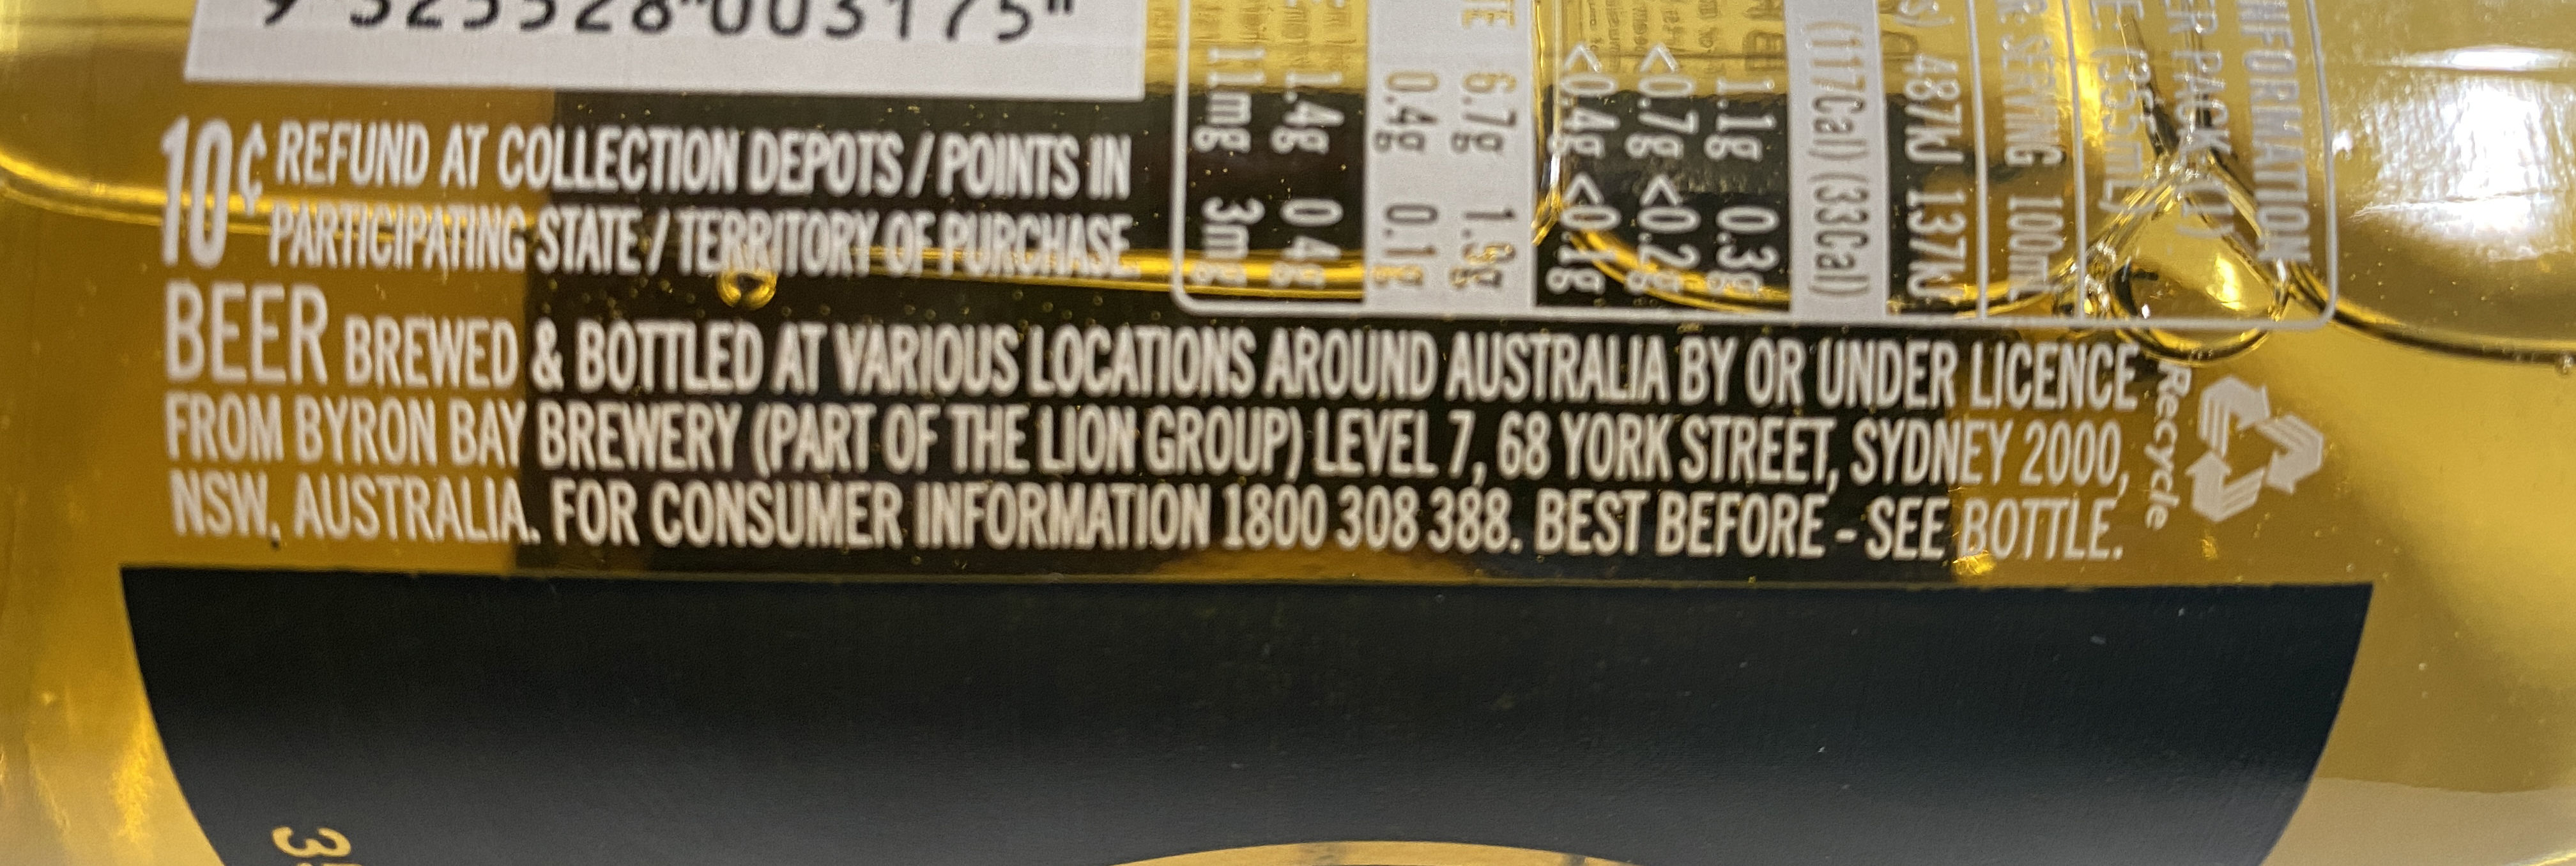 Just part of the clarifcying statements on Lion's Byron Bay Premium Lager packaging.